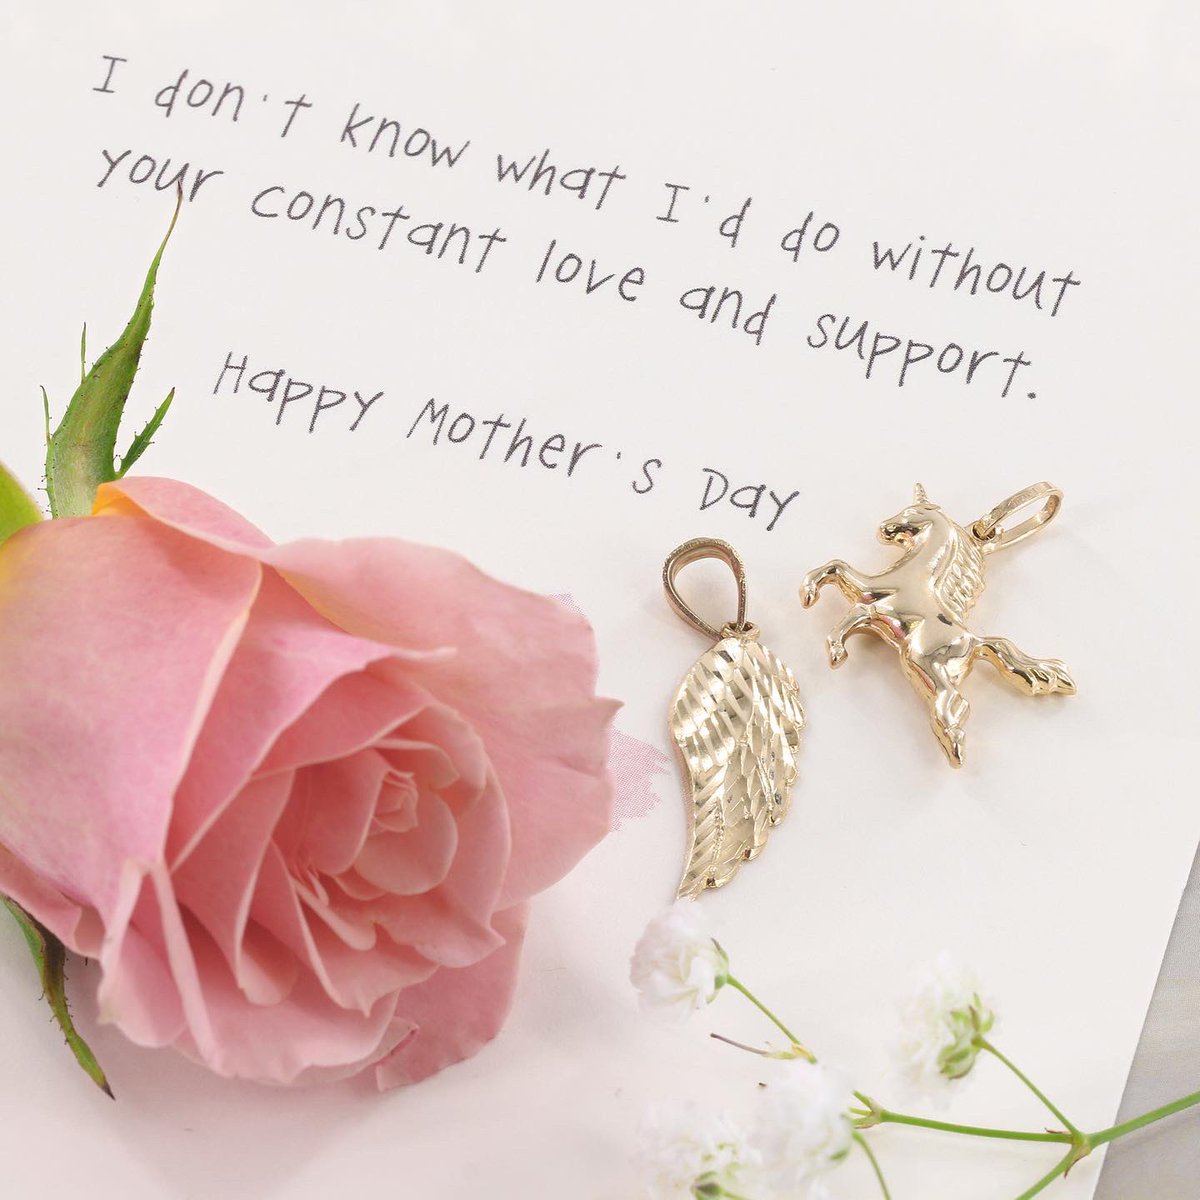 💖 Sparkle up Mom’s special day with the timeless elegance of gold pendants and necklaces! 💫 A gift that shines as brightly as her love. ✨ Shop now for 30% Off‼️Link in our Bio. #MothersDayGifts #GoldPendants #777Jewelry #GoldJewelry #FineJewelry